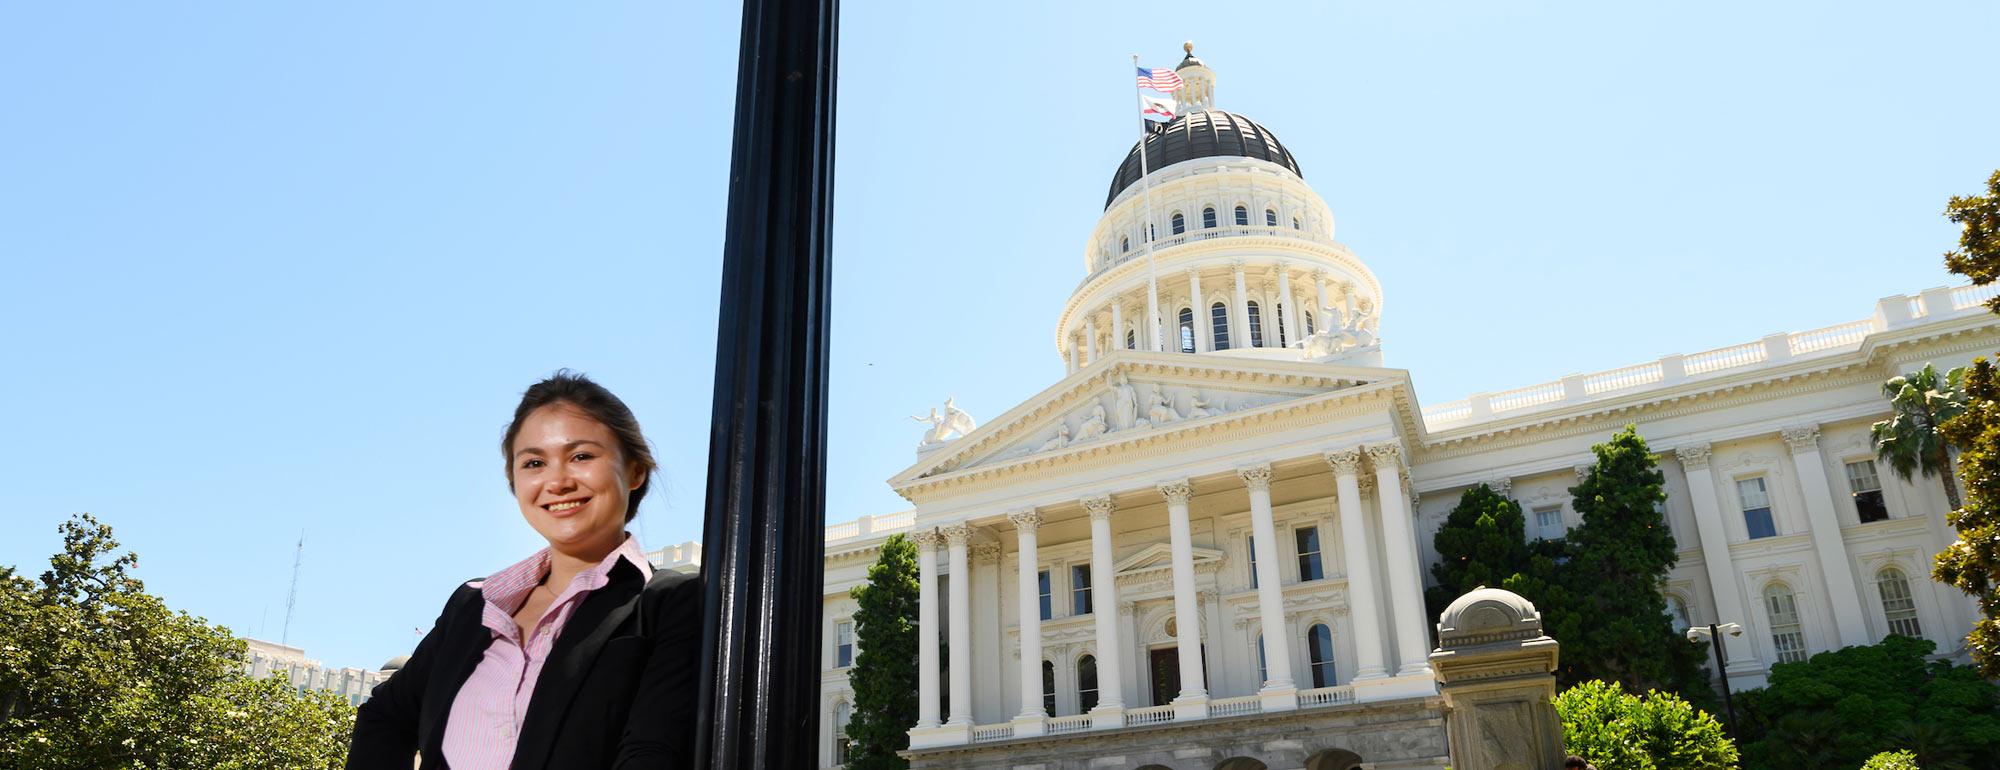 A female student poses with the California State Capitol building in the background